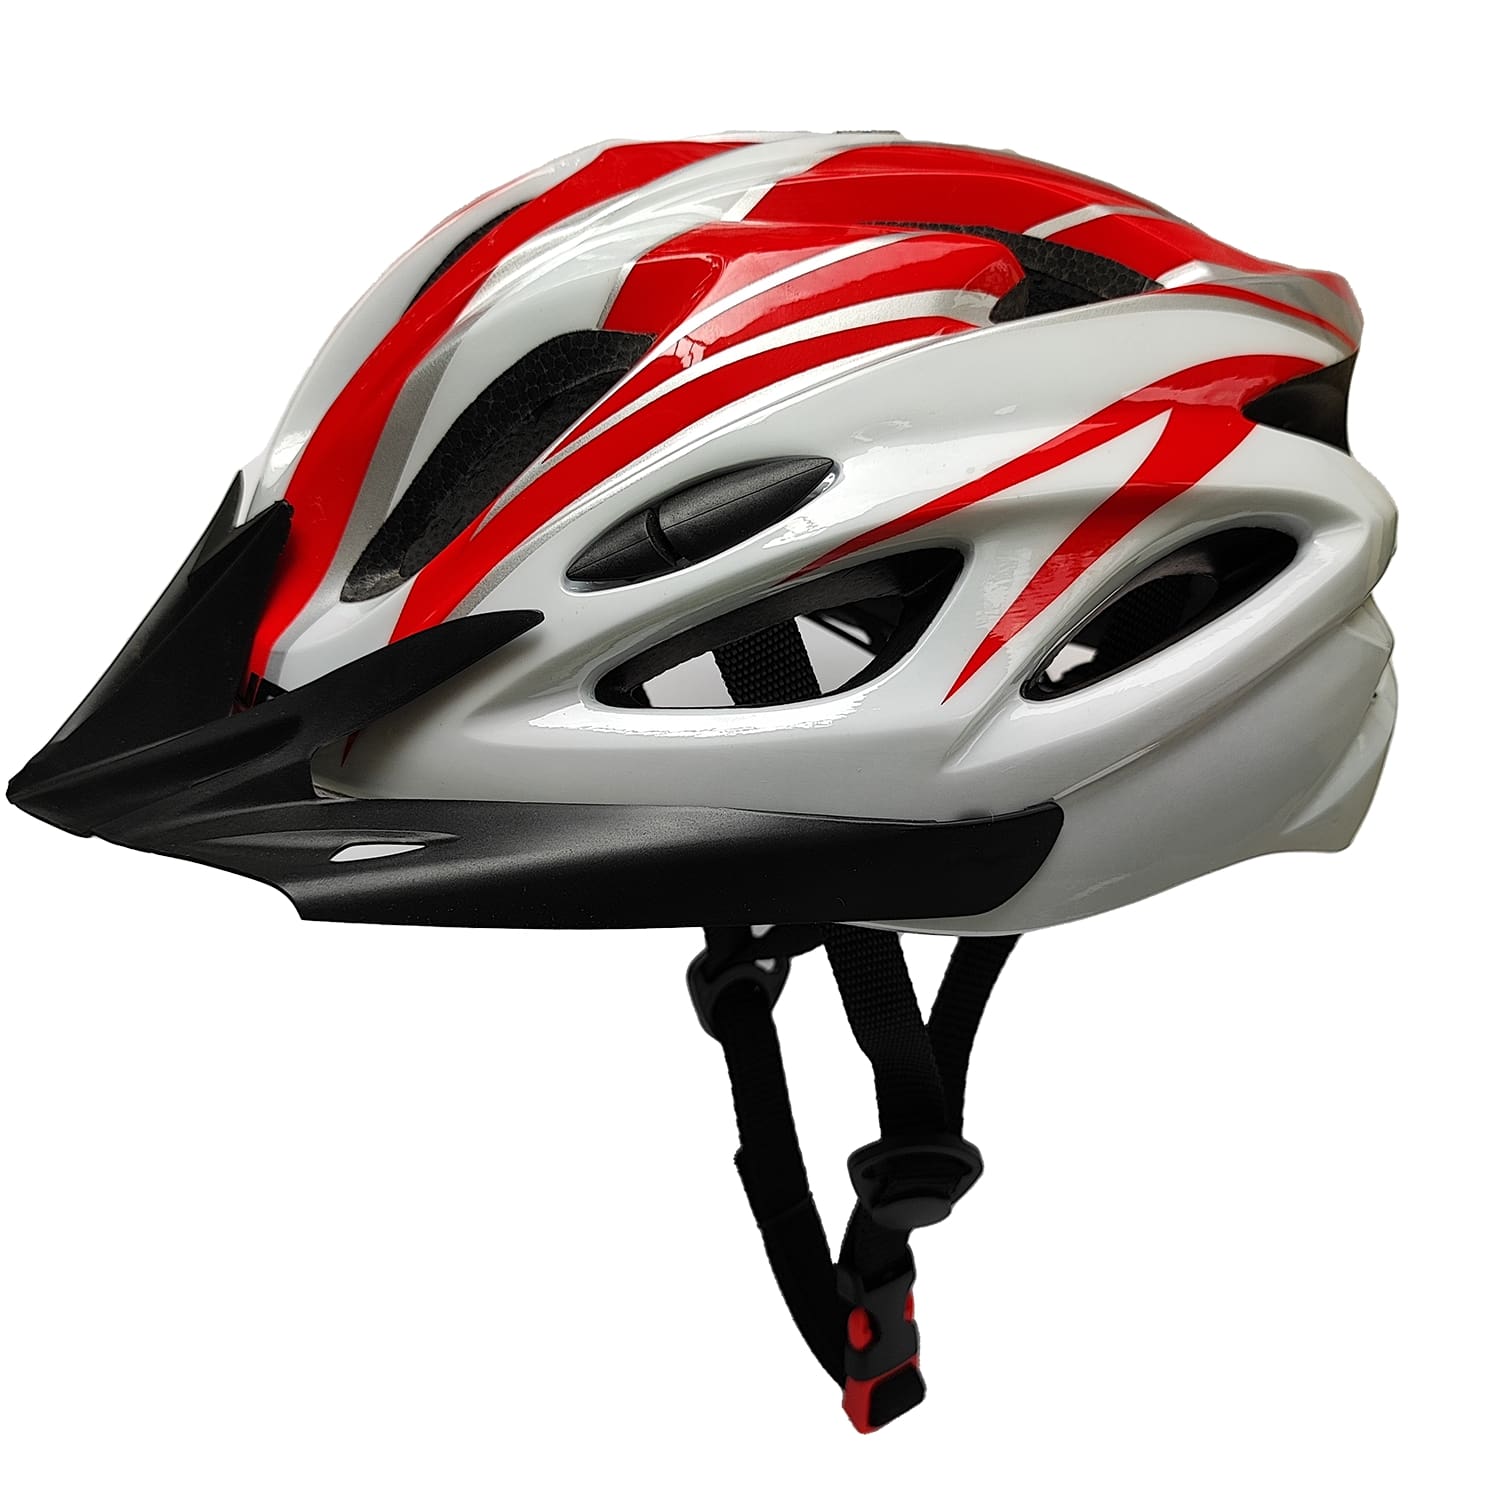 Bicycle helmet red & white color top view by omobikes